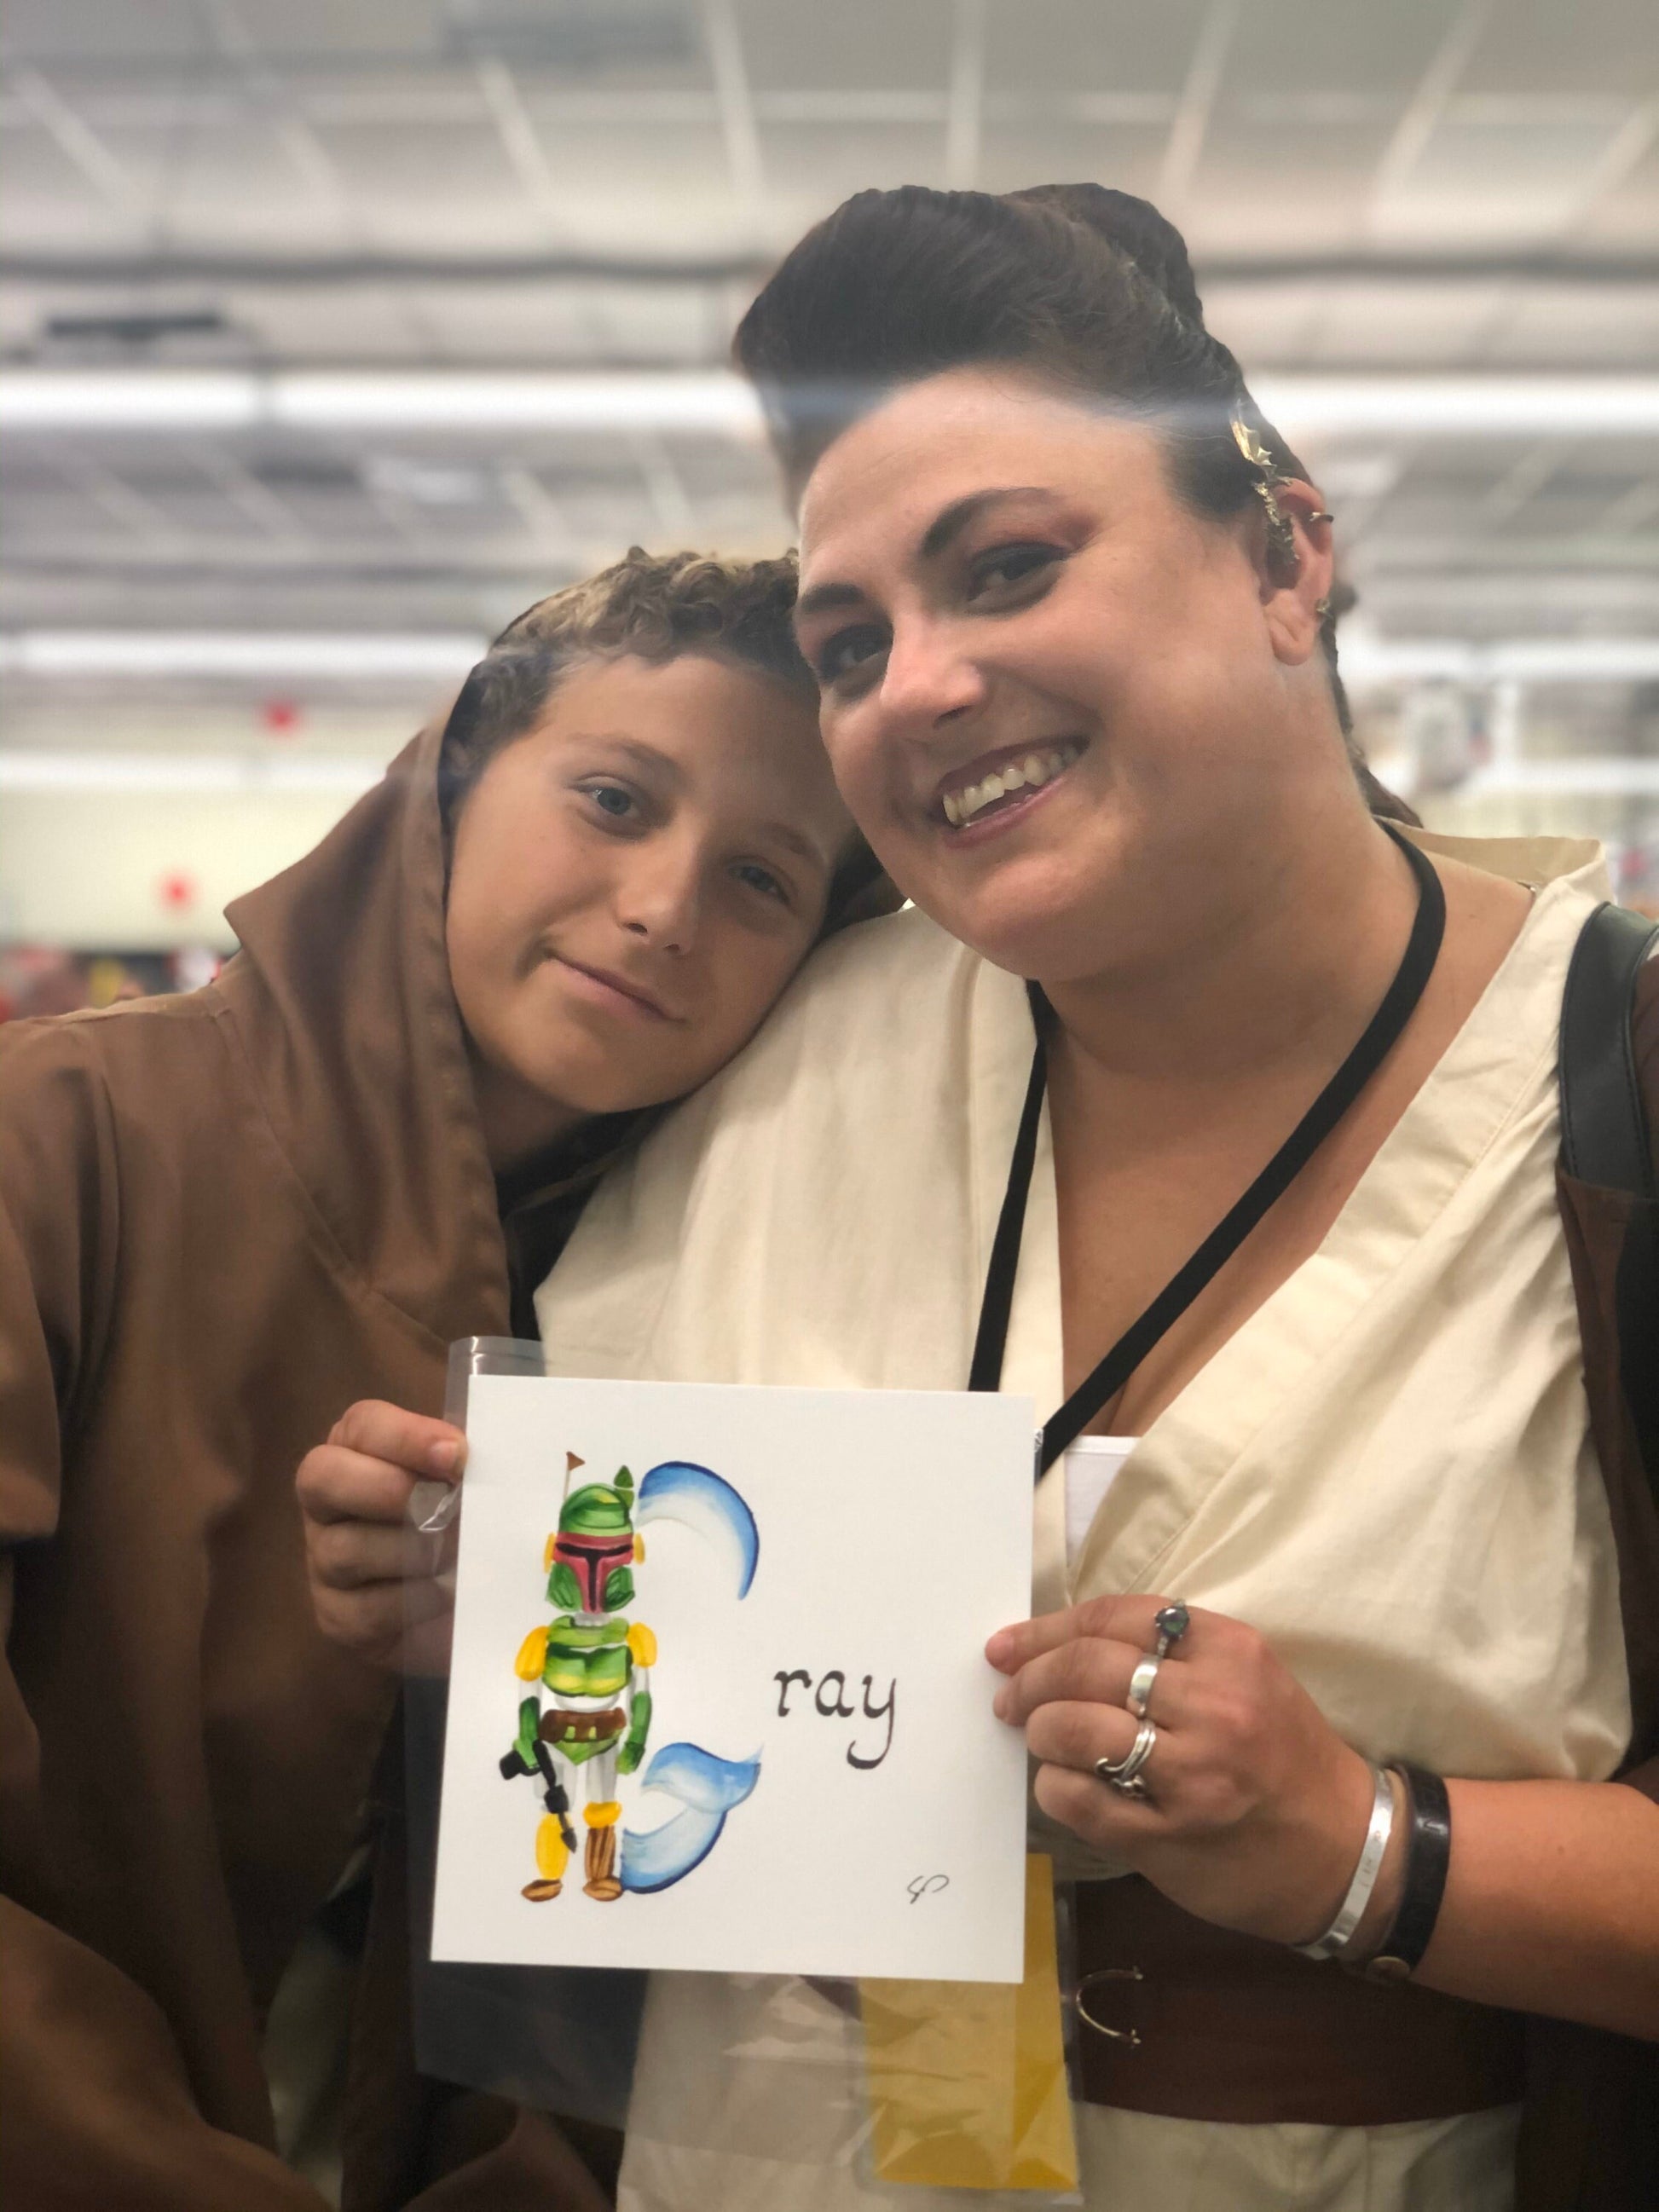 Mother & son holding up their new family name painting featuring a galaxy hunter with the name "Gray." Taken at Bakersfield Comic Con.